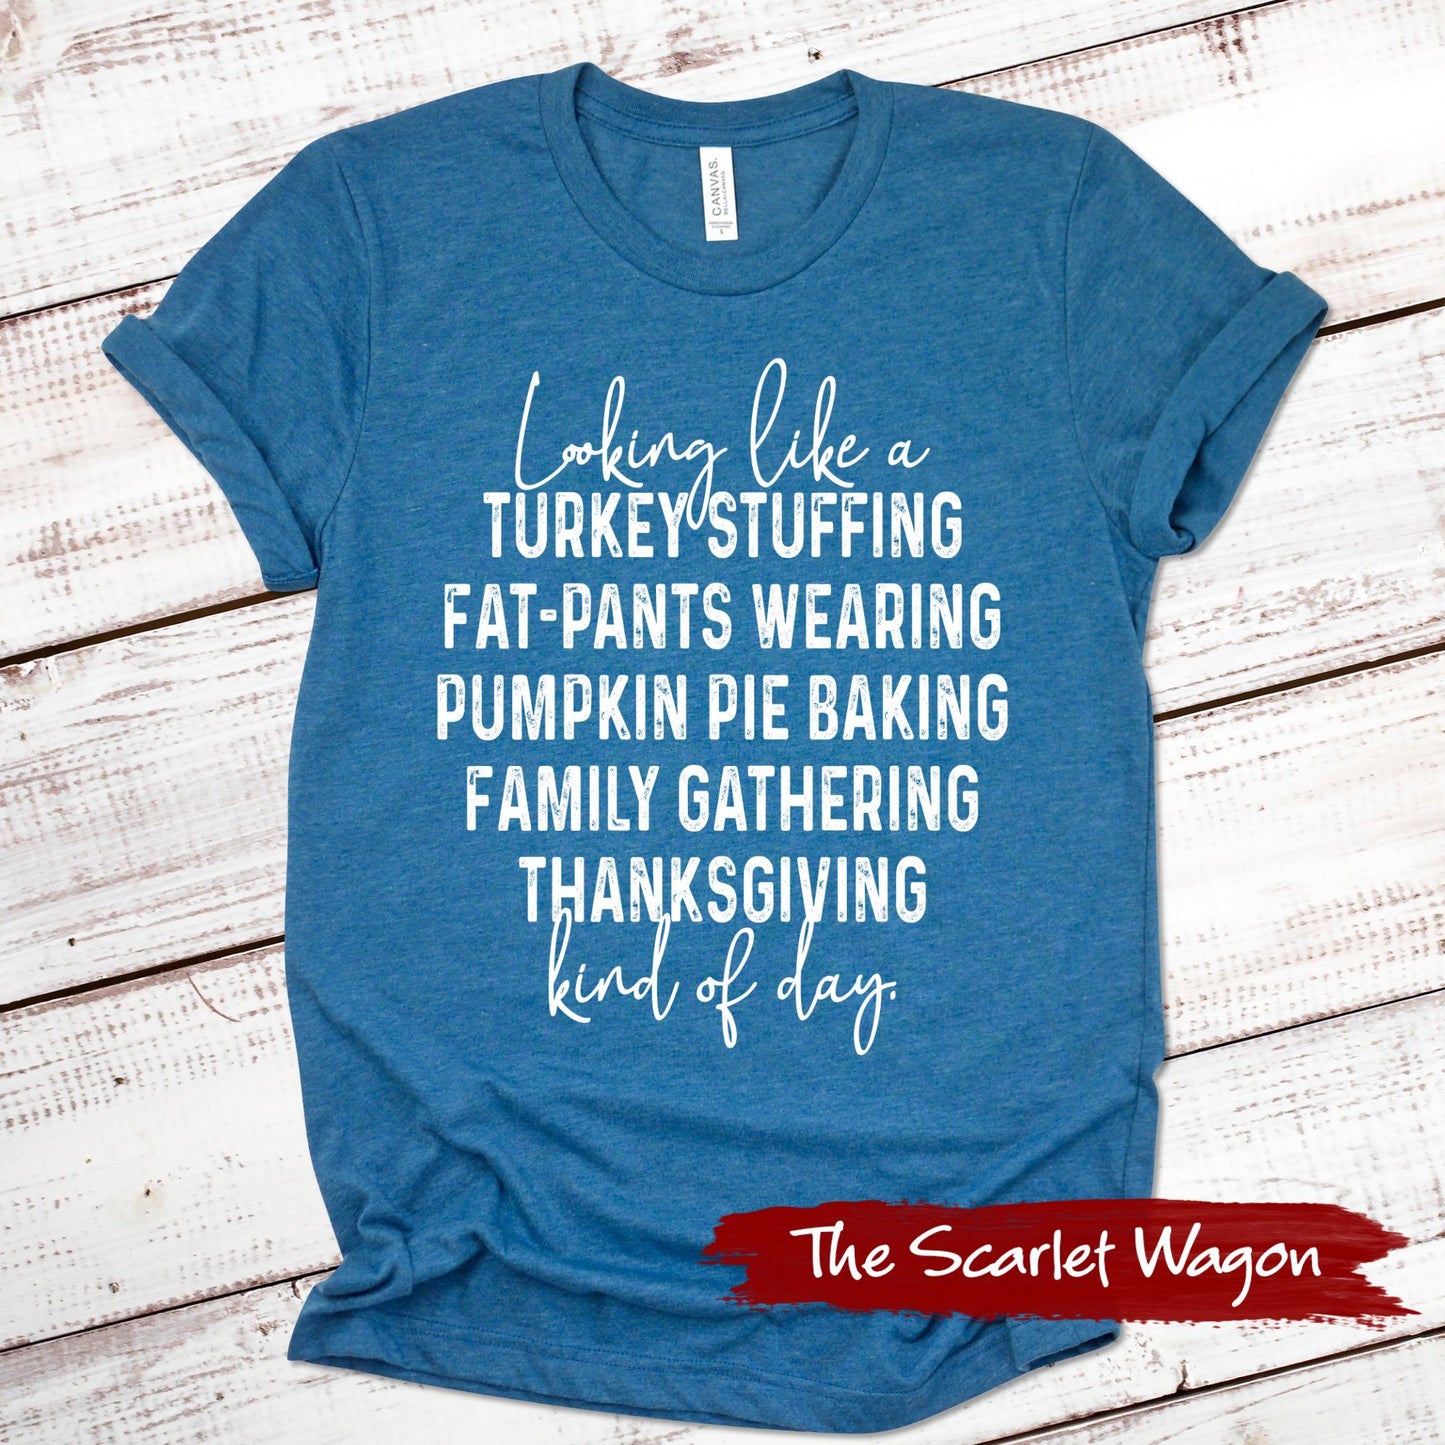 Thanksgiving Kind of Day Thanksgiving Shirt Scarlet Wagon Heather Deep Teal XS 